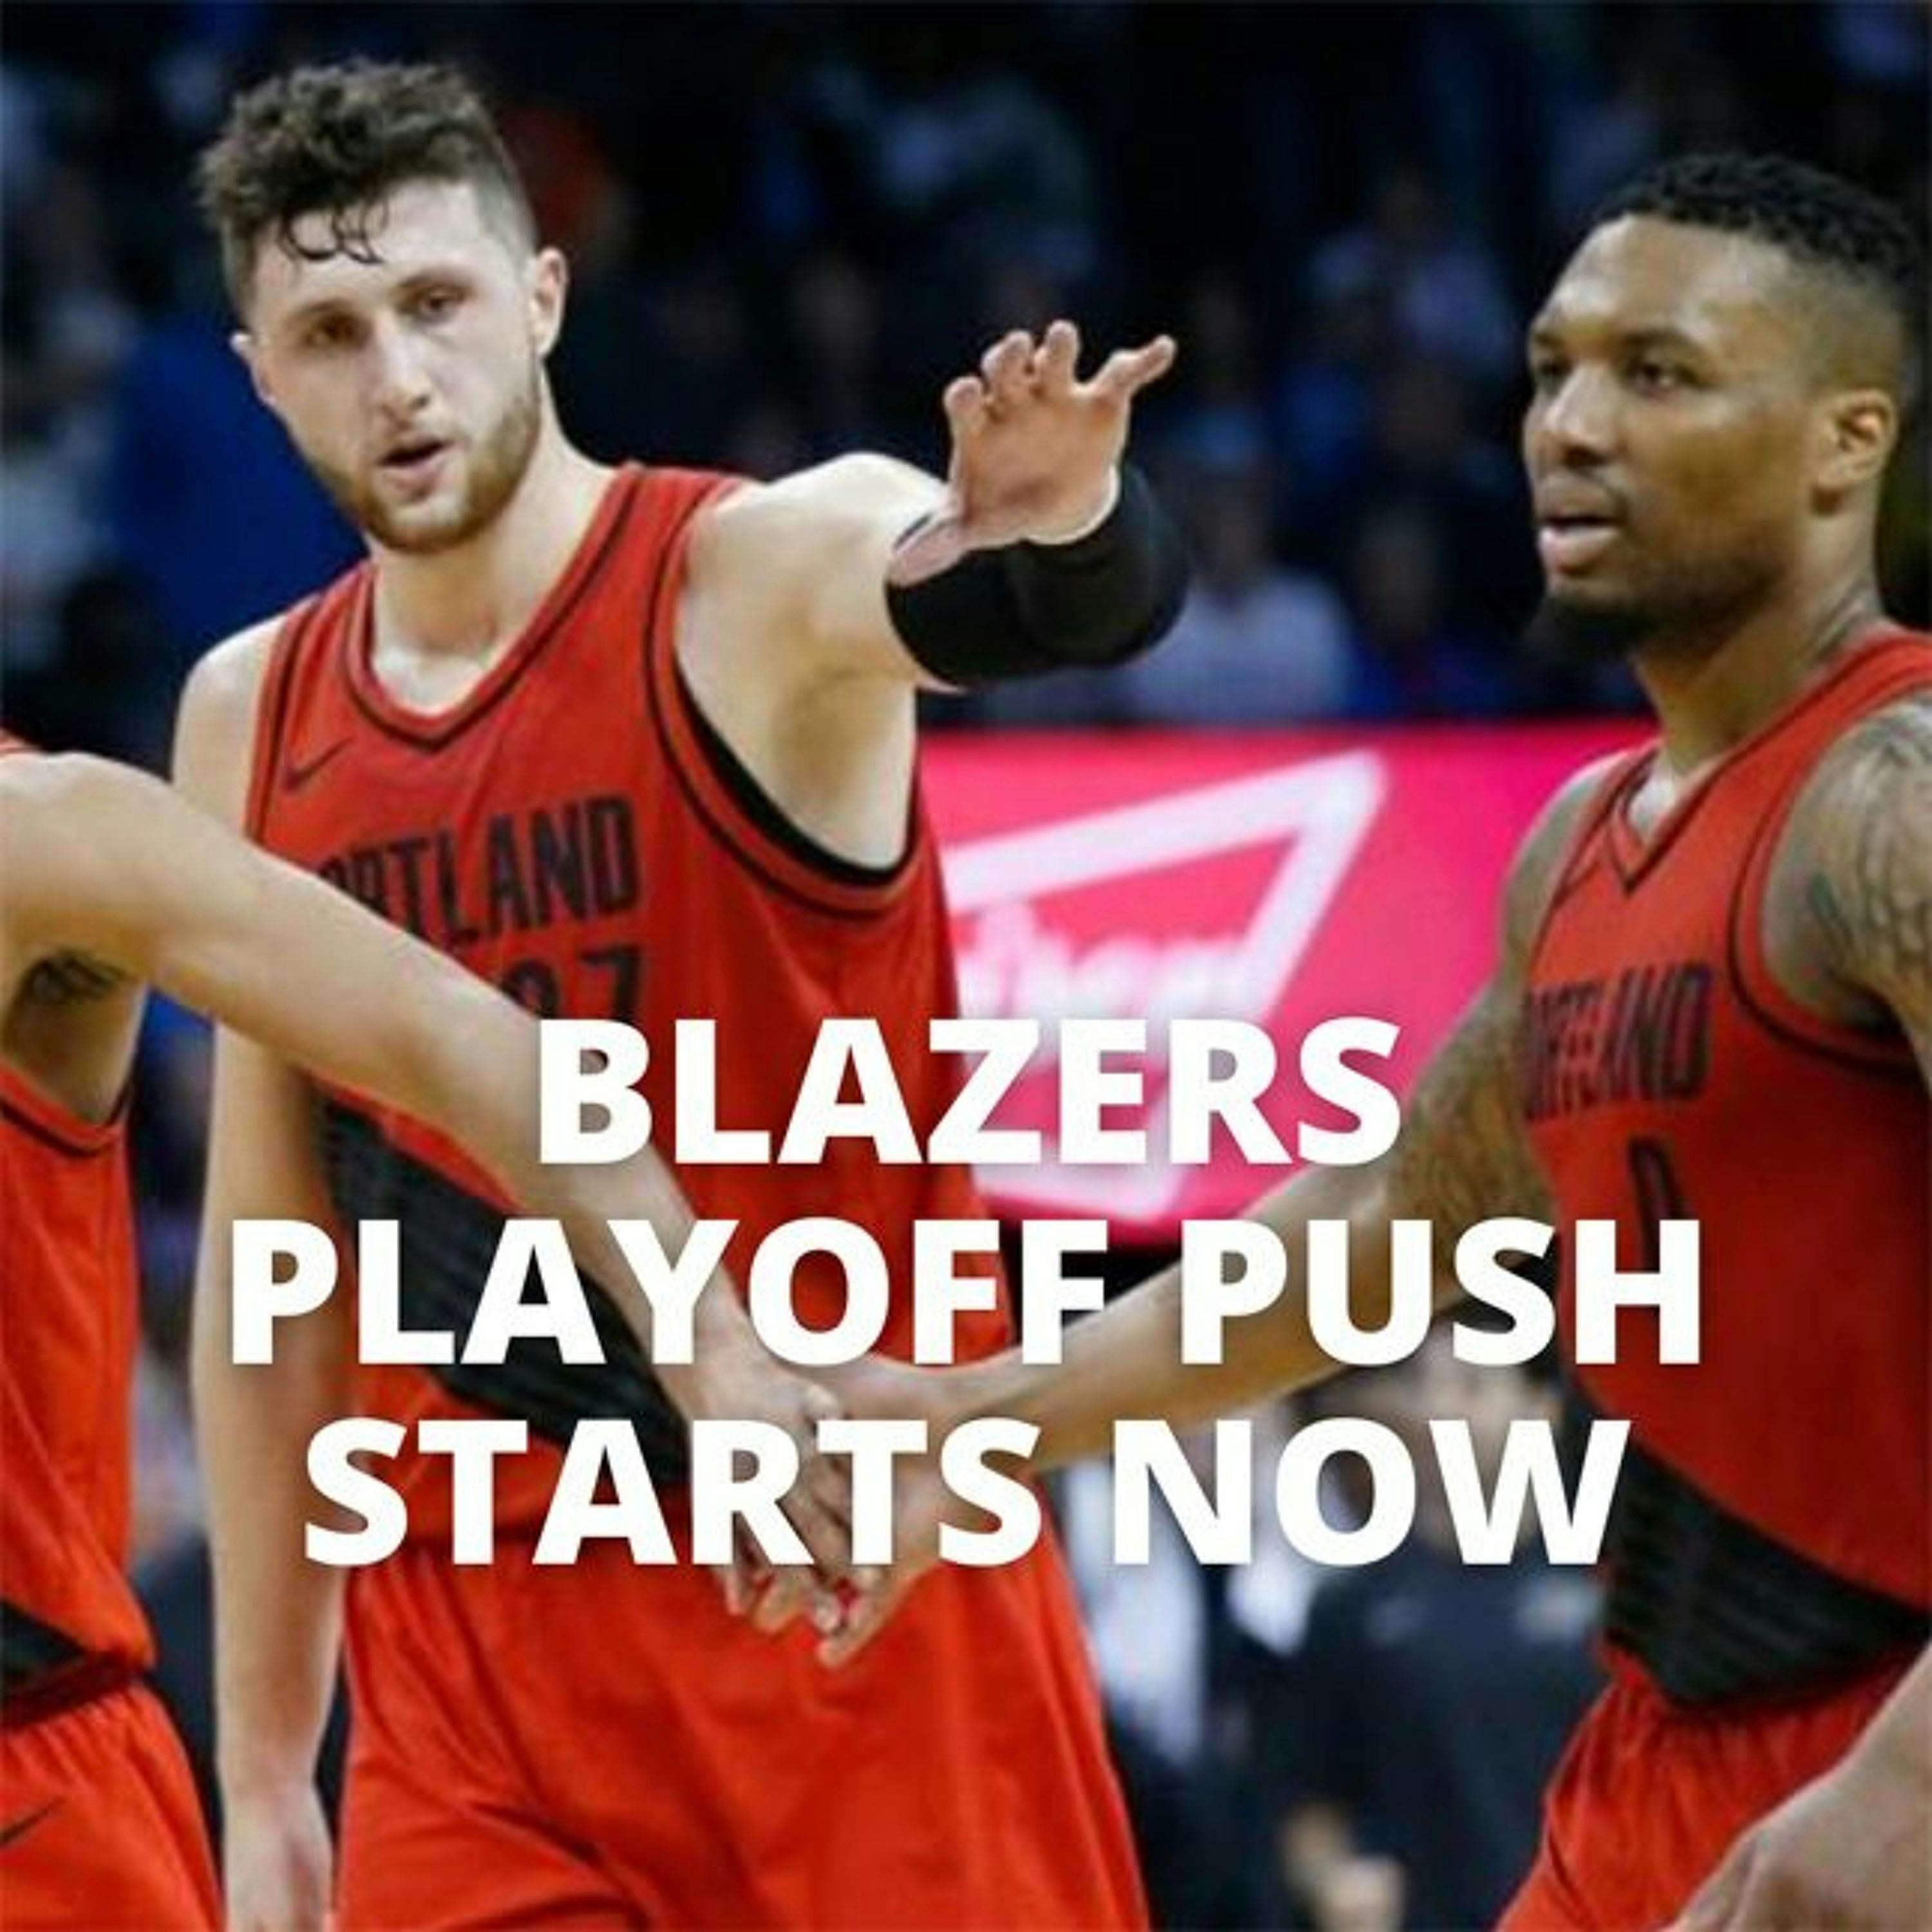 With Nurkic back, Blazers’ playoff push starts now